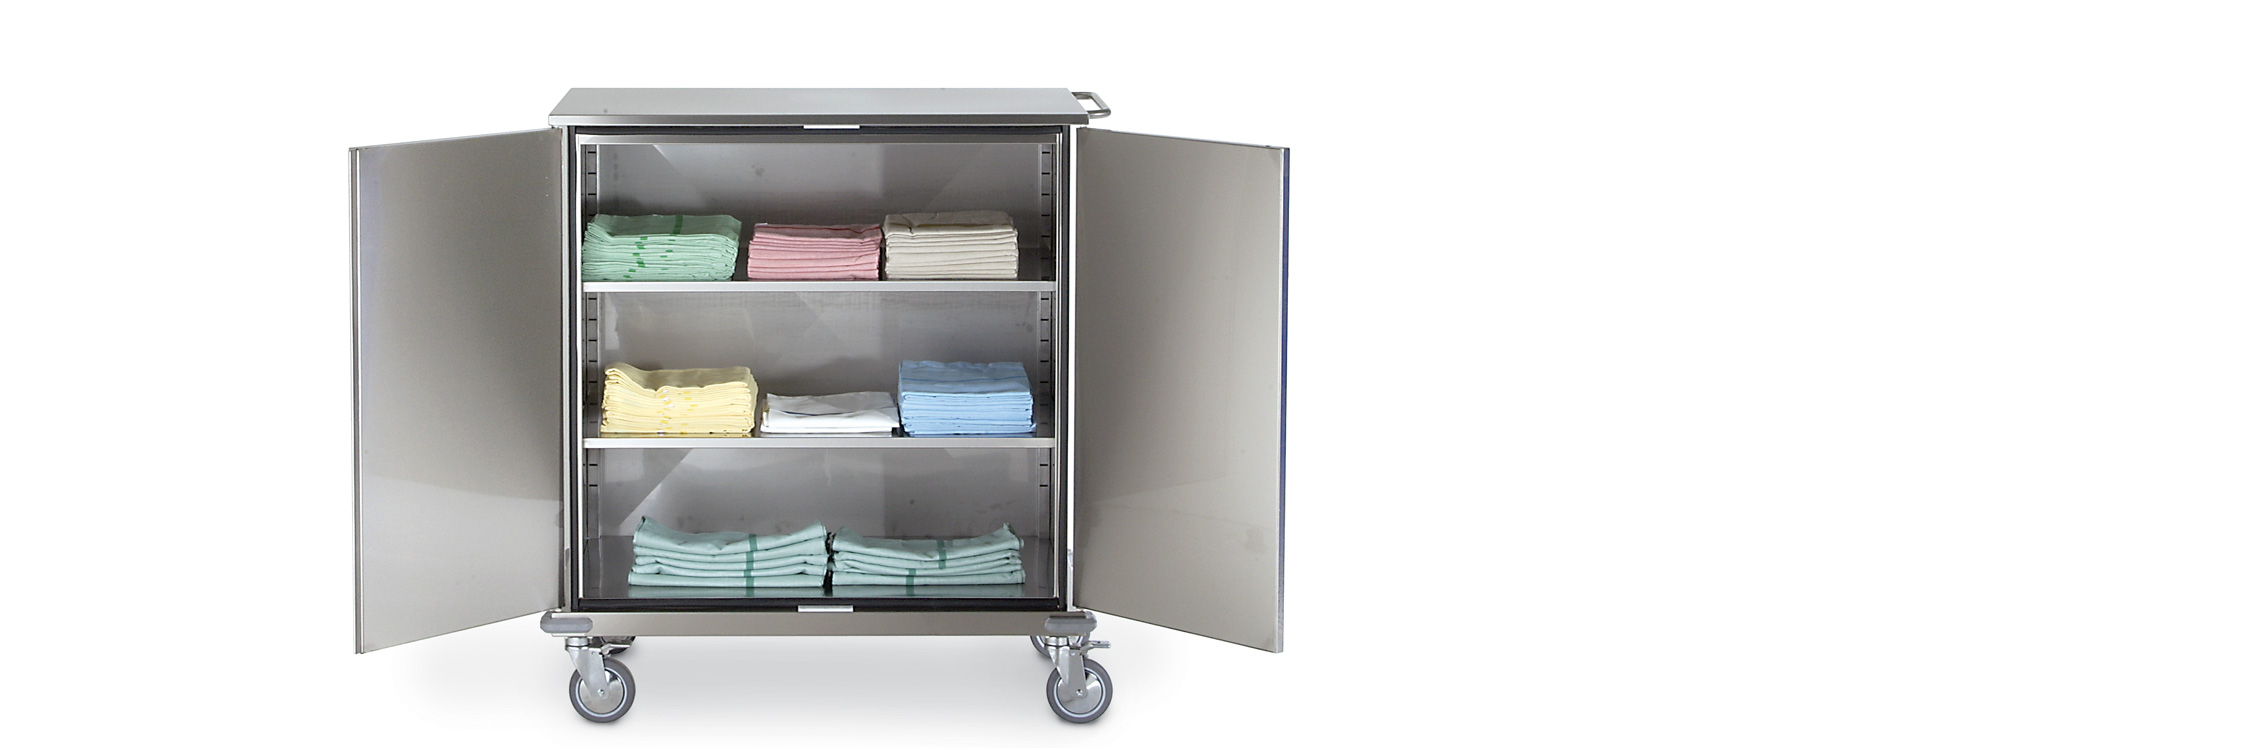 a CT80 clean linen trolley and cabinet, entirely made of AISI304 stainless steel